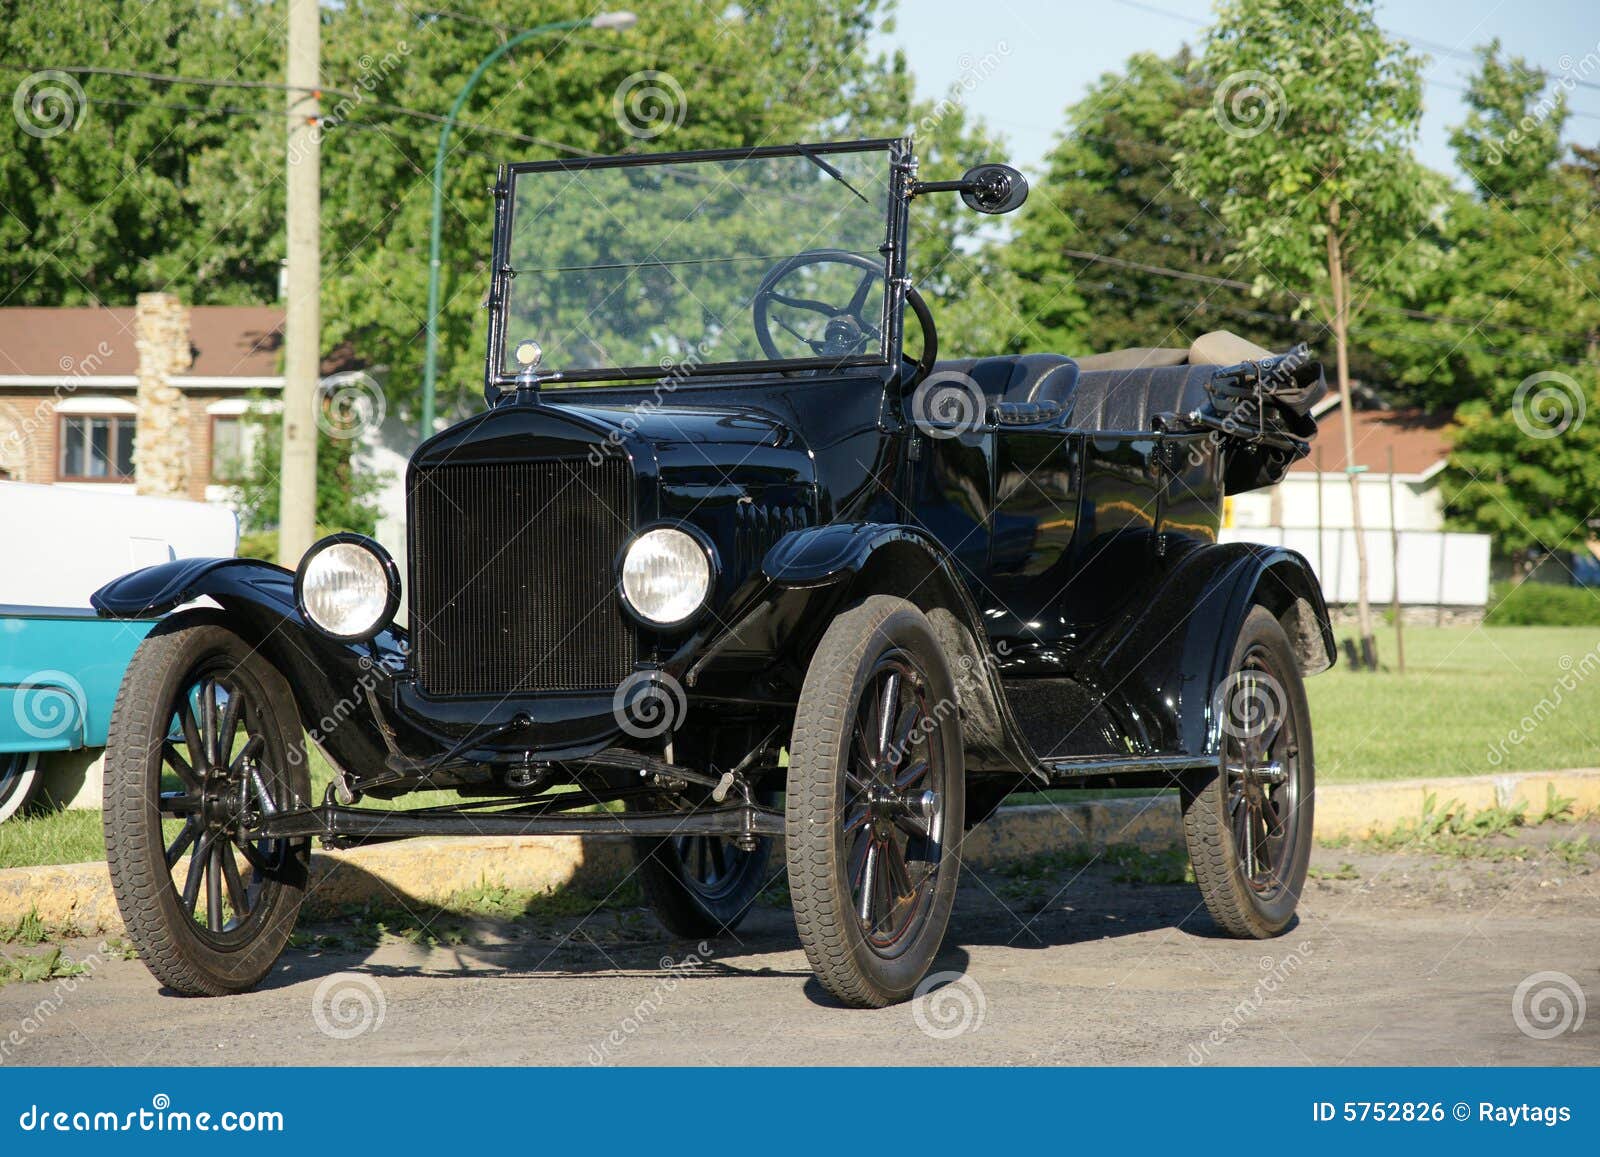 Payment plans for the ford model t #9